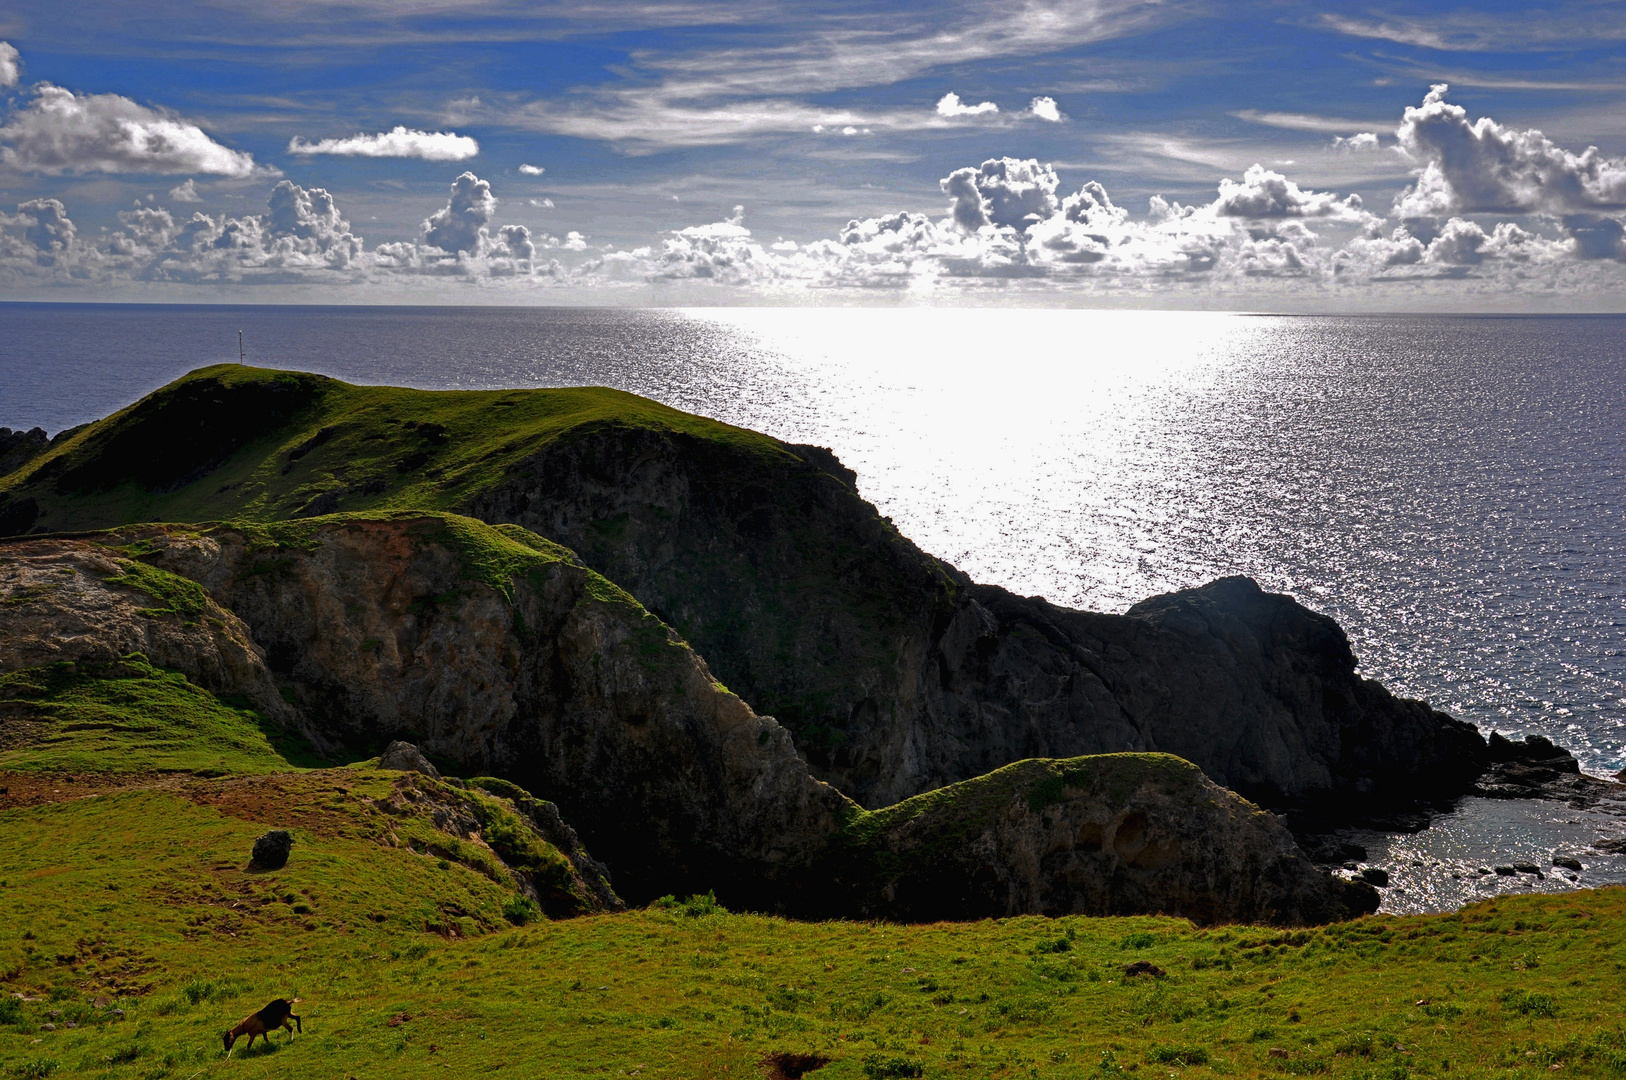 The Hills are Alive in Batanes